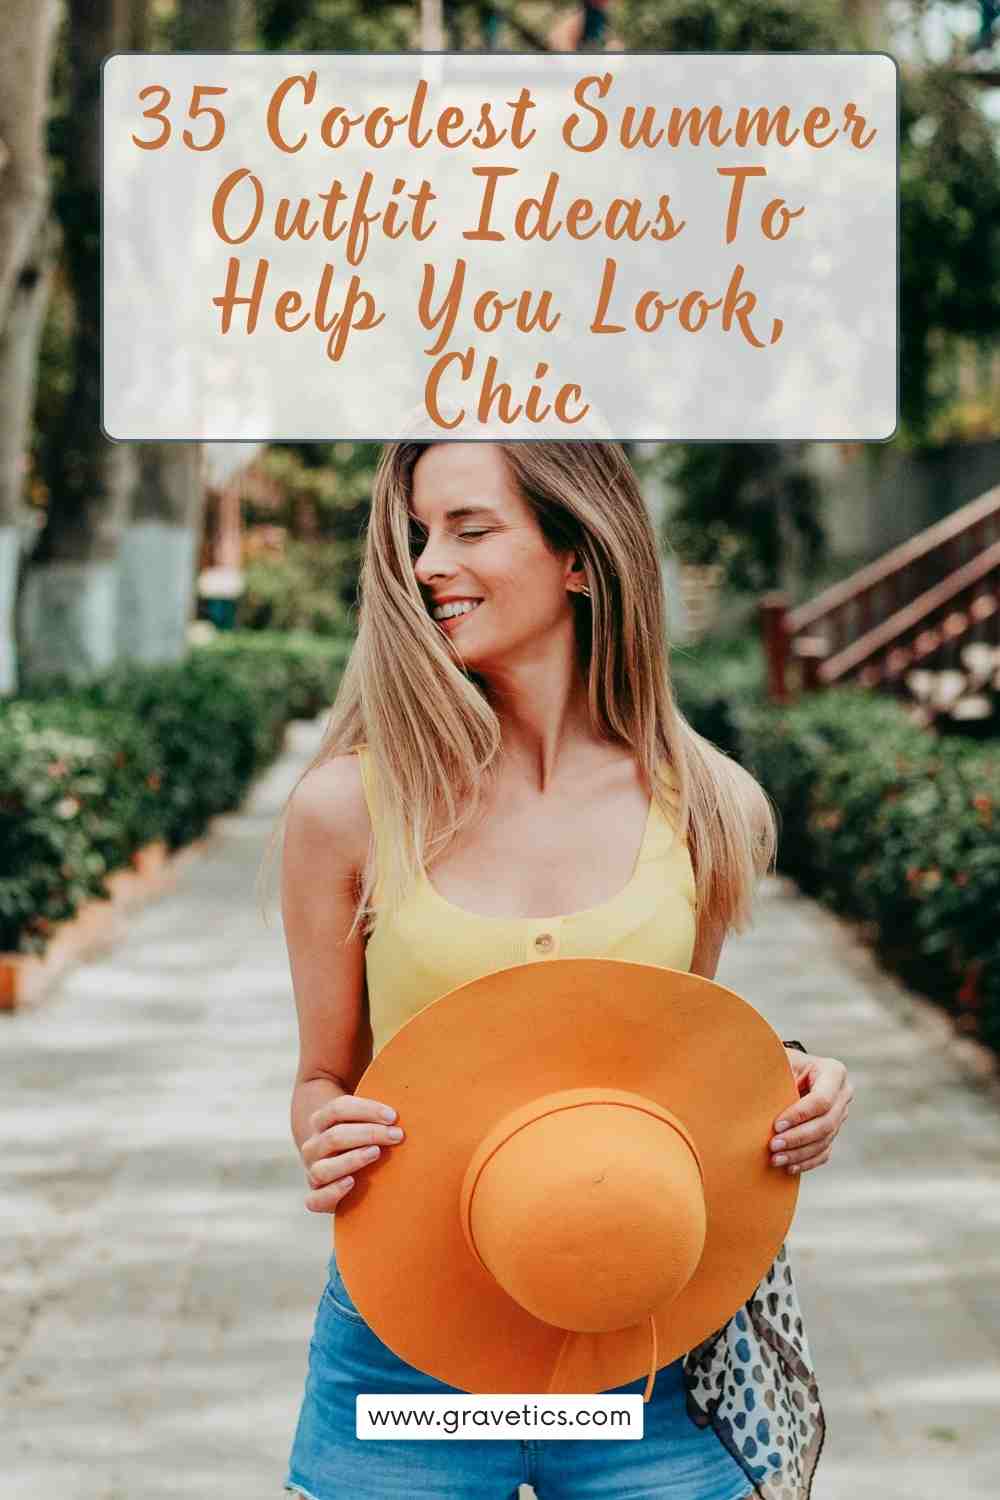 35 Coolest Summer Outfit Ideas To Help You Look, Chic